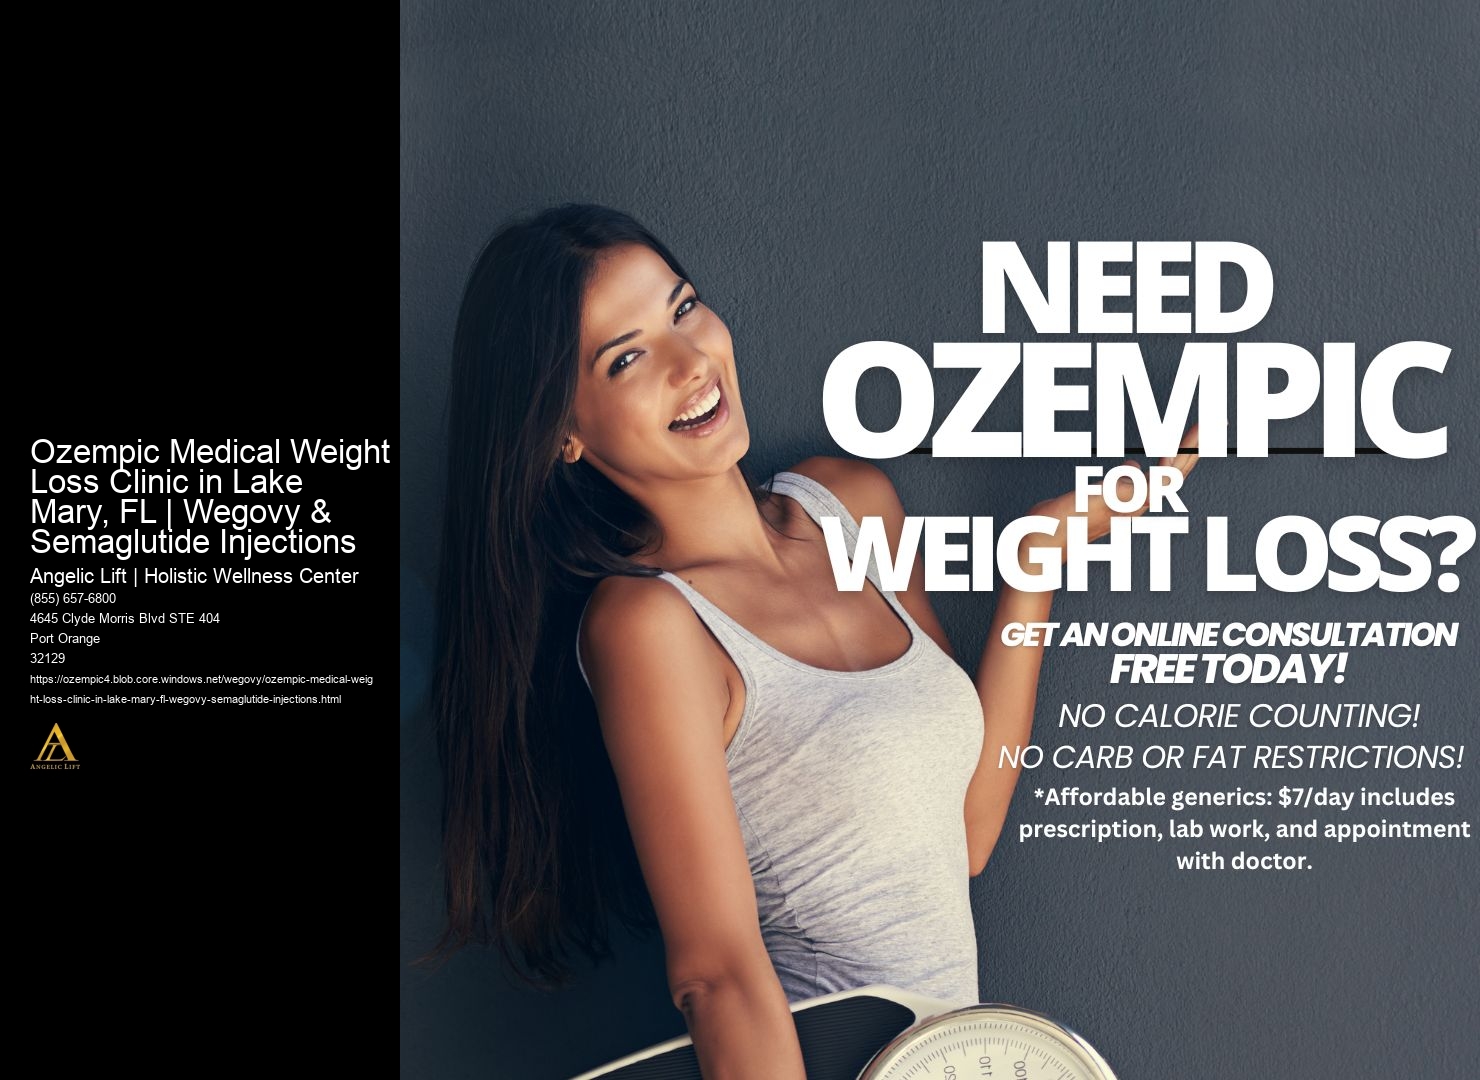 Ozempic Medical Weight Loss Clinic in Lake Mary, FL | Wegovy & Semaglutide Injections